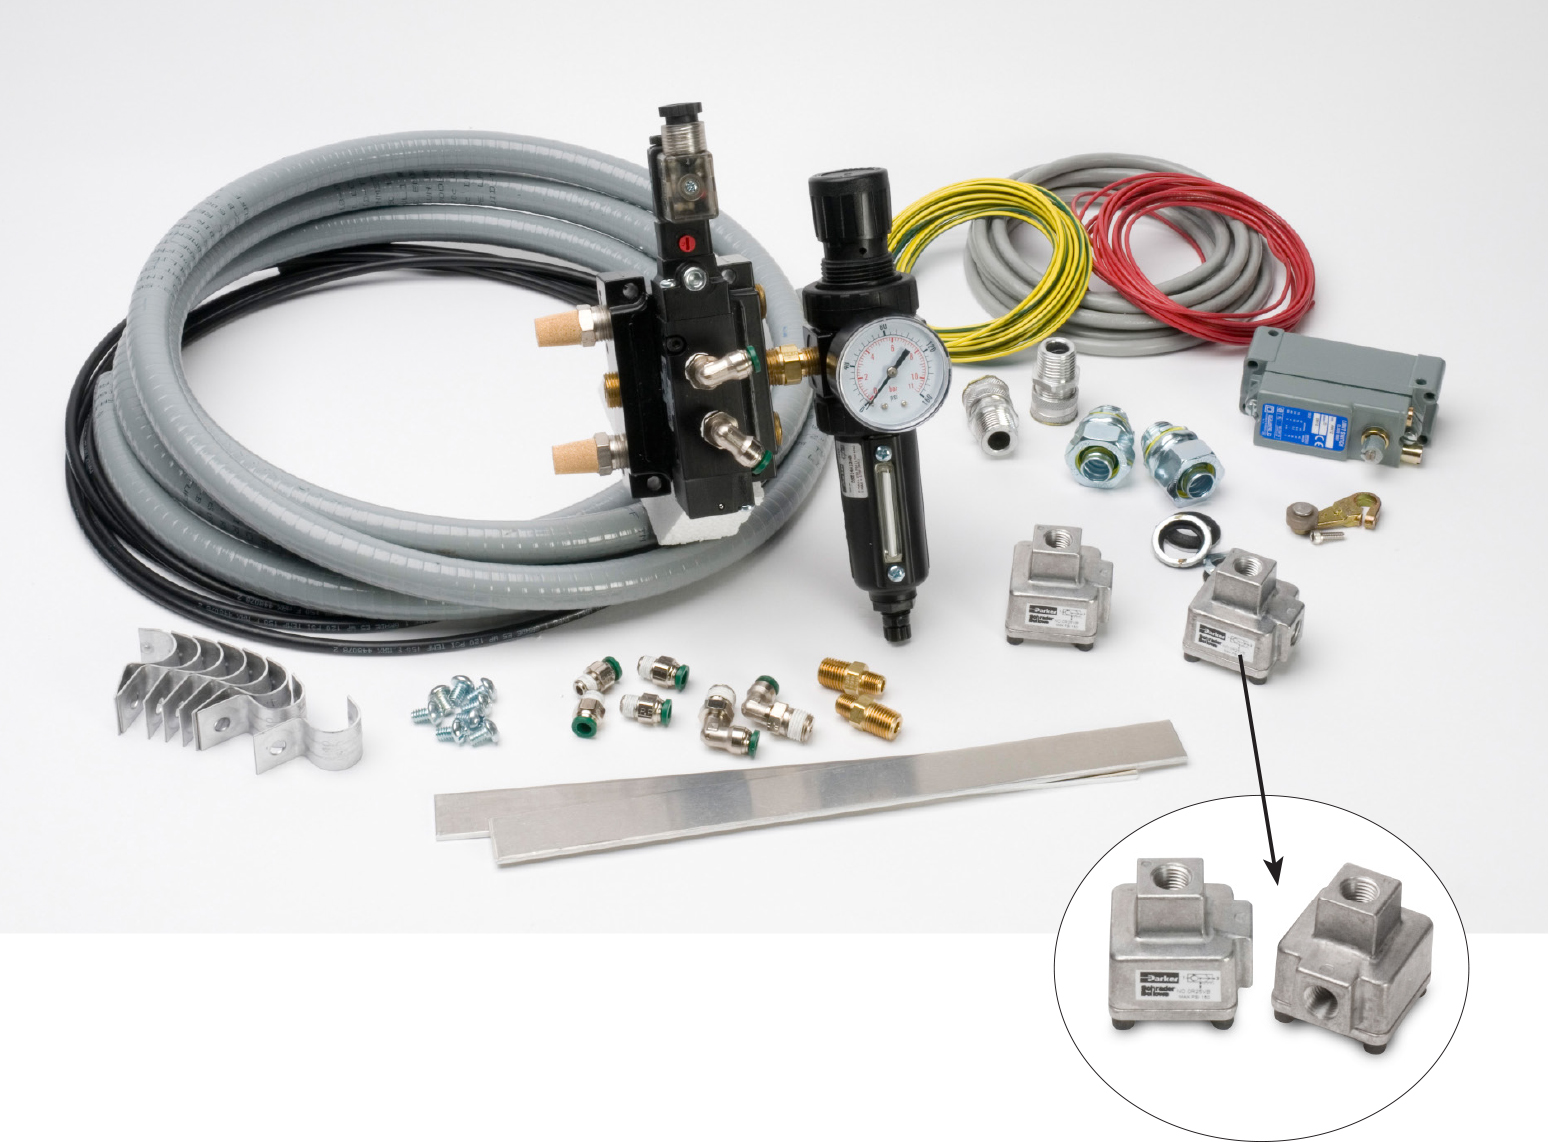 Electrical / Pneumatic Start-Up Kits Start-Up Kit Includes Valve Assembly, Pressure Gauge, Pressure Regulator, Limit Switch, Quick Exhaust Valves, Fittings, Bracket, Hose and Schematics.